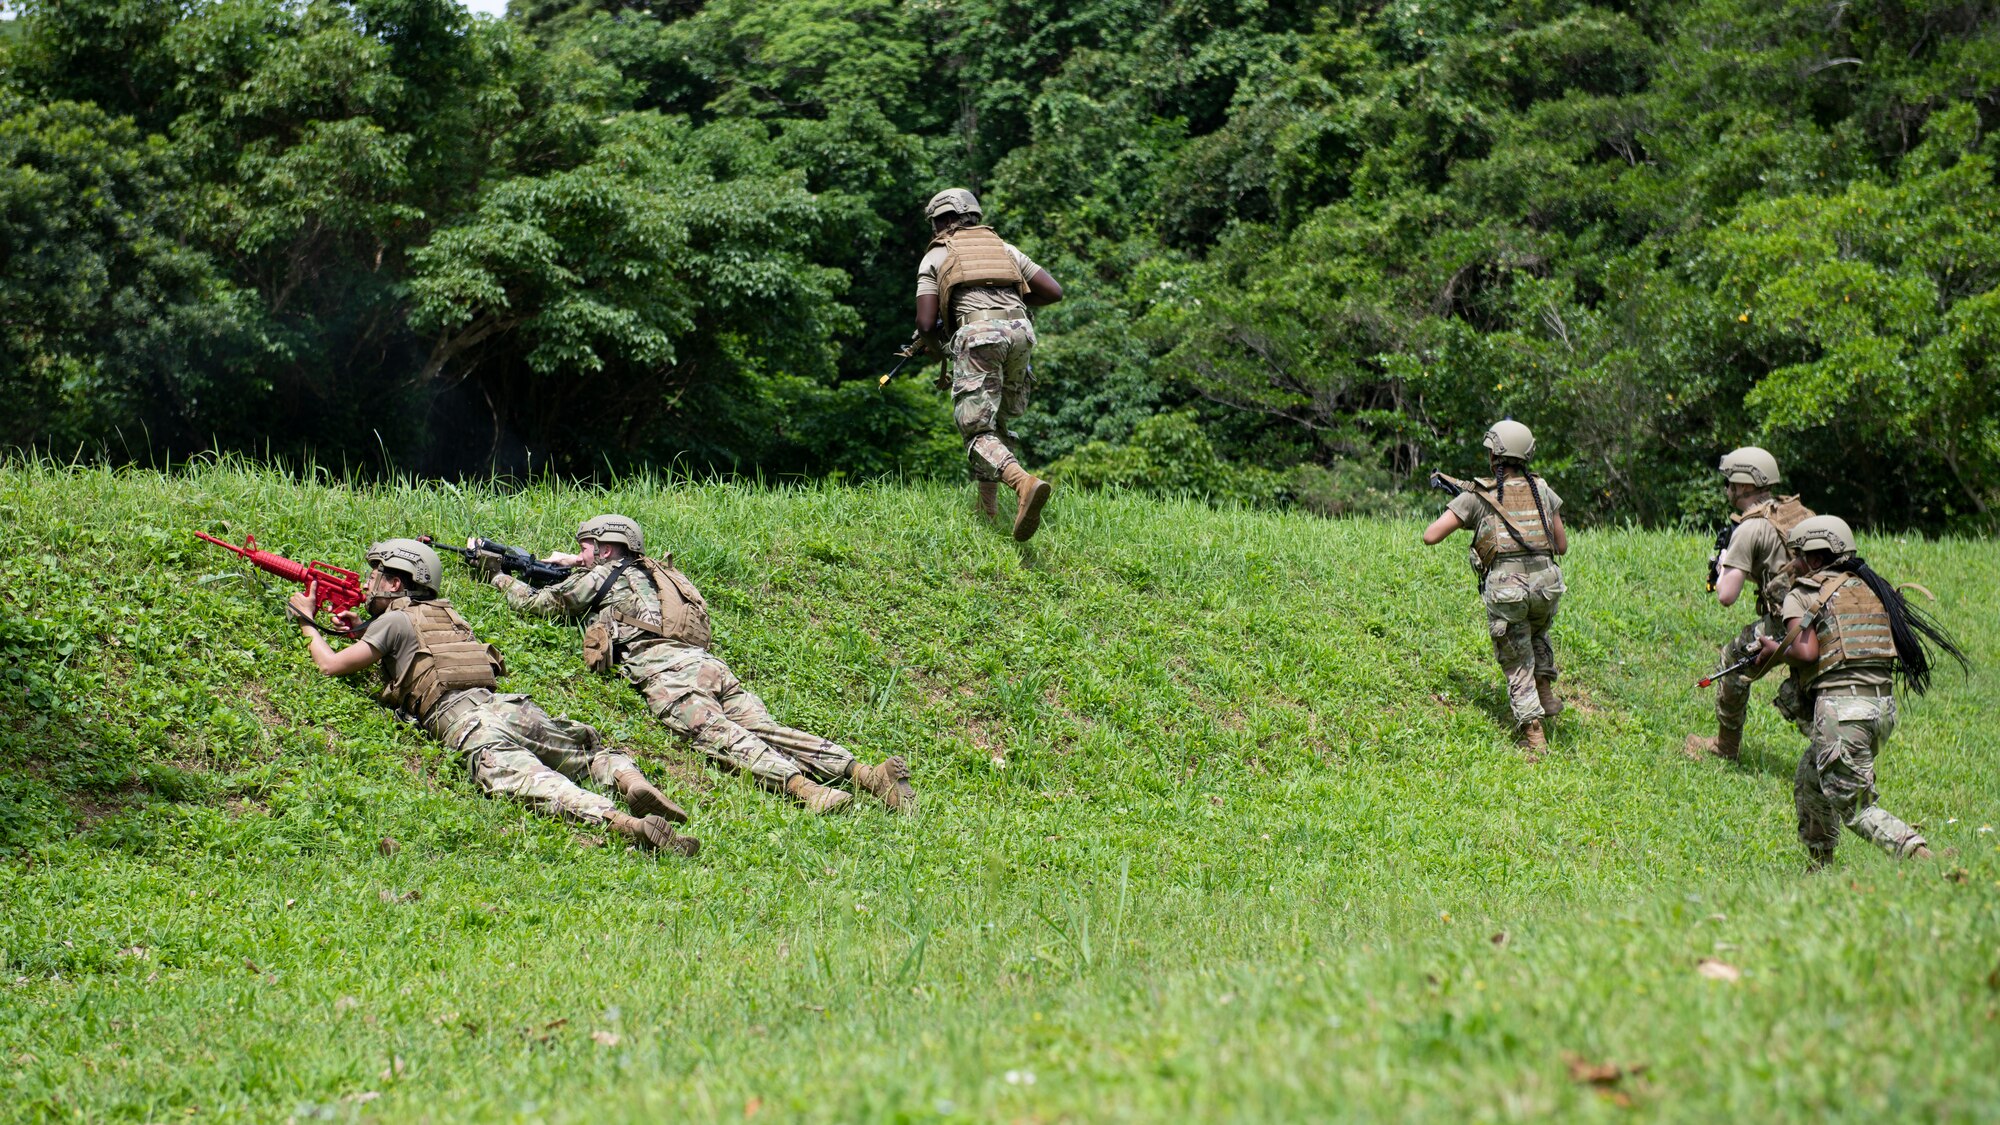 U.S. Air Force Airmen assigned to the 18th Security Forces Squadron engage with opposing forces during a field training exercise at Kadena Air Base, Japan, April 27, 2022. The Airmen were faced with unexpected hostile encounters, training their ability to effectively respond and communicate with team members in a simulated combat environment. (U.S. Air Force photo by Senior Airman Jessi Monte)